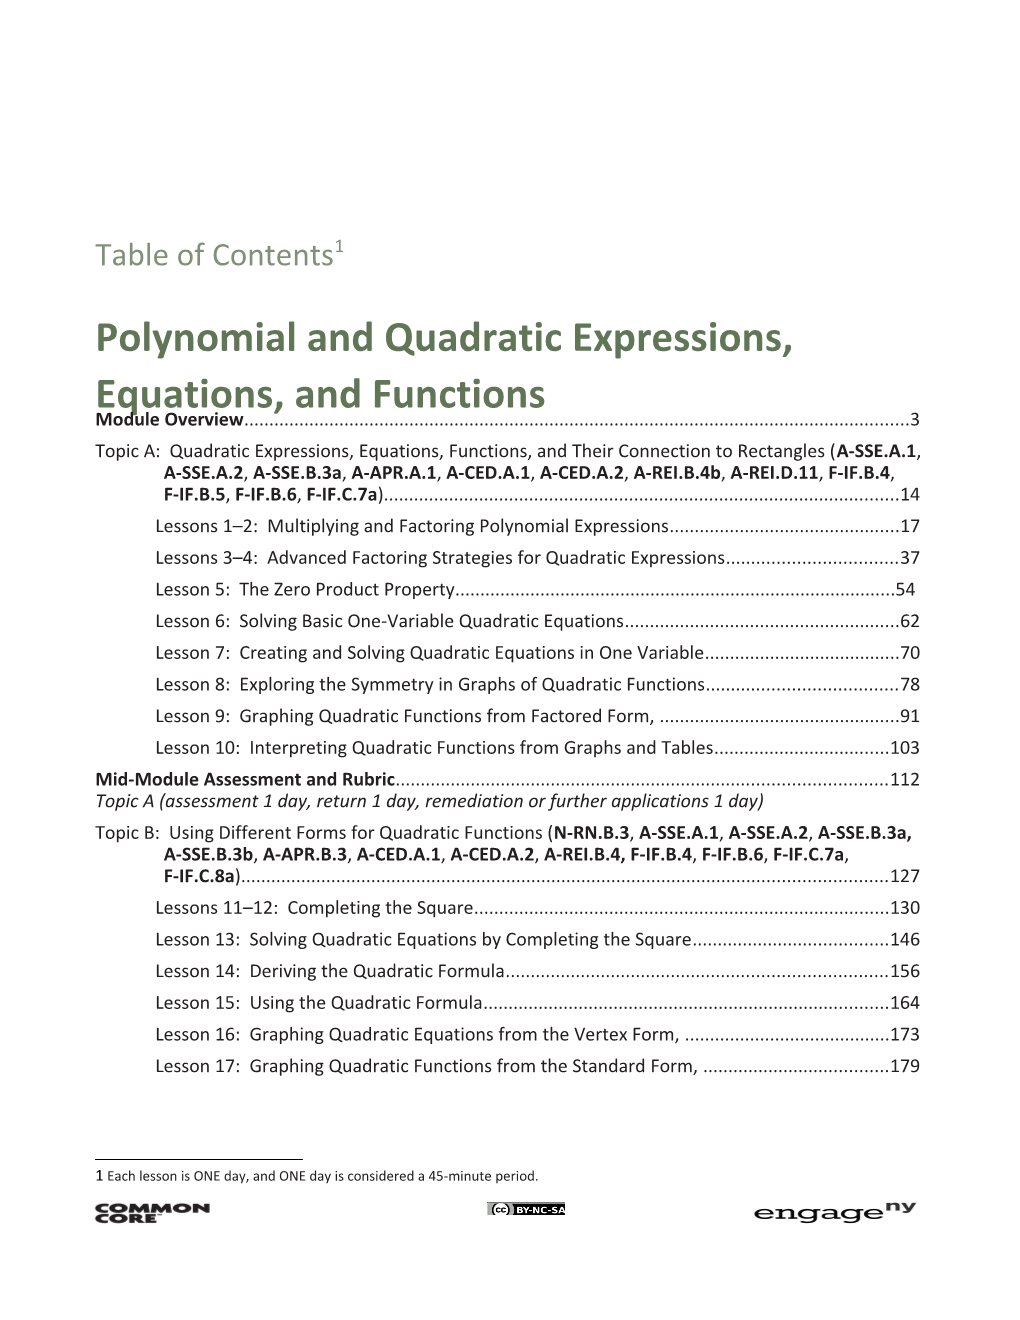 Polynomial and Quadratic Expressions, Equations, and Functions